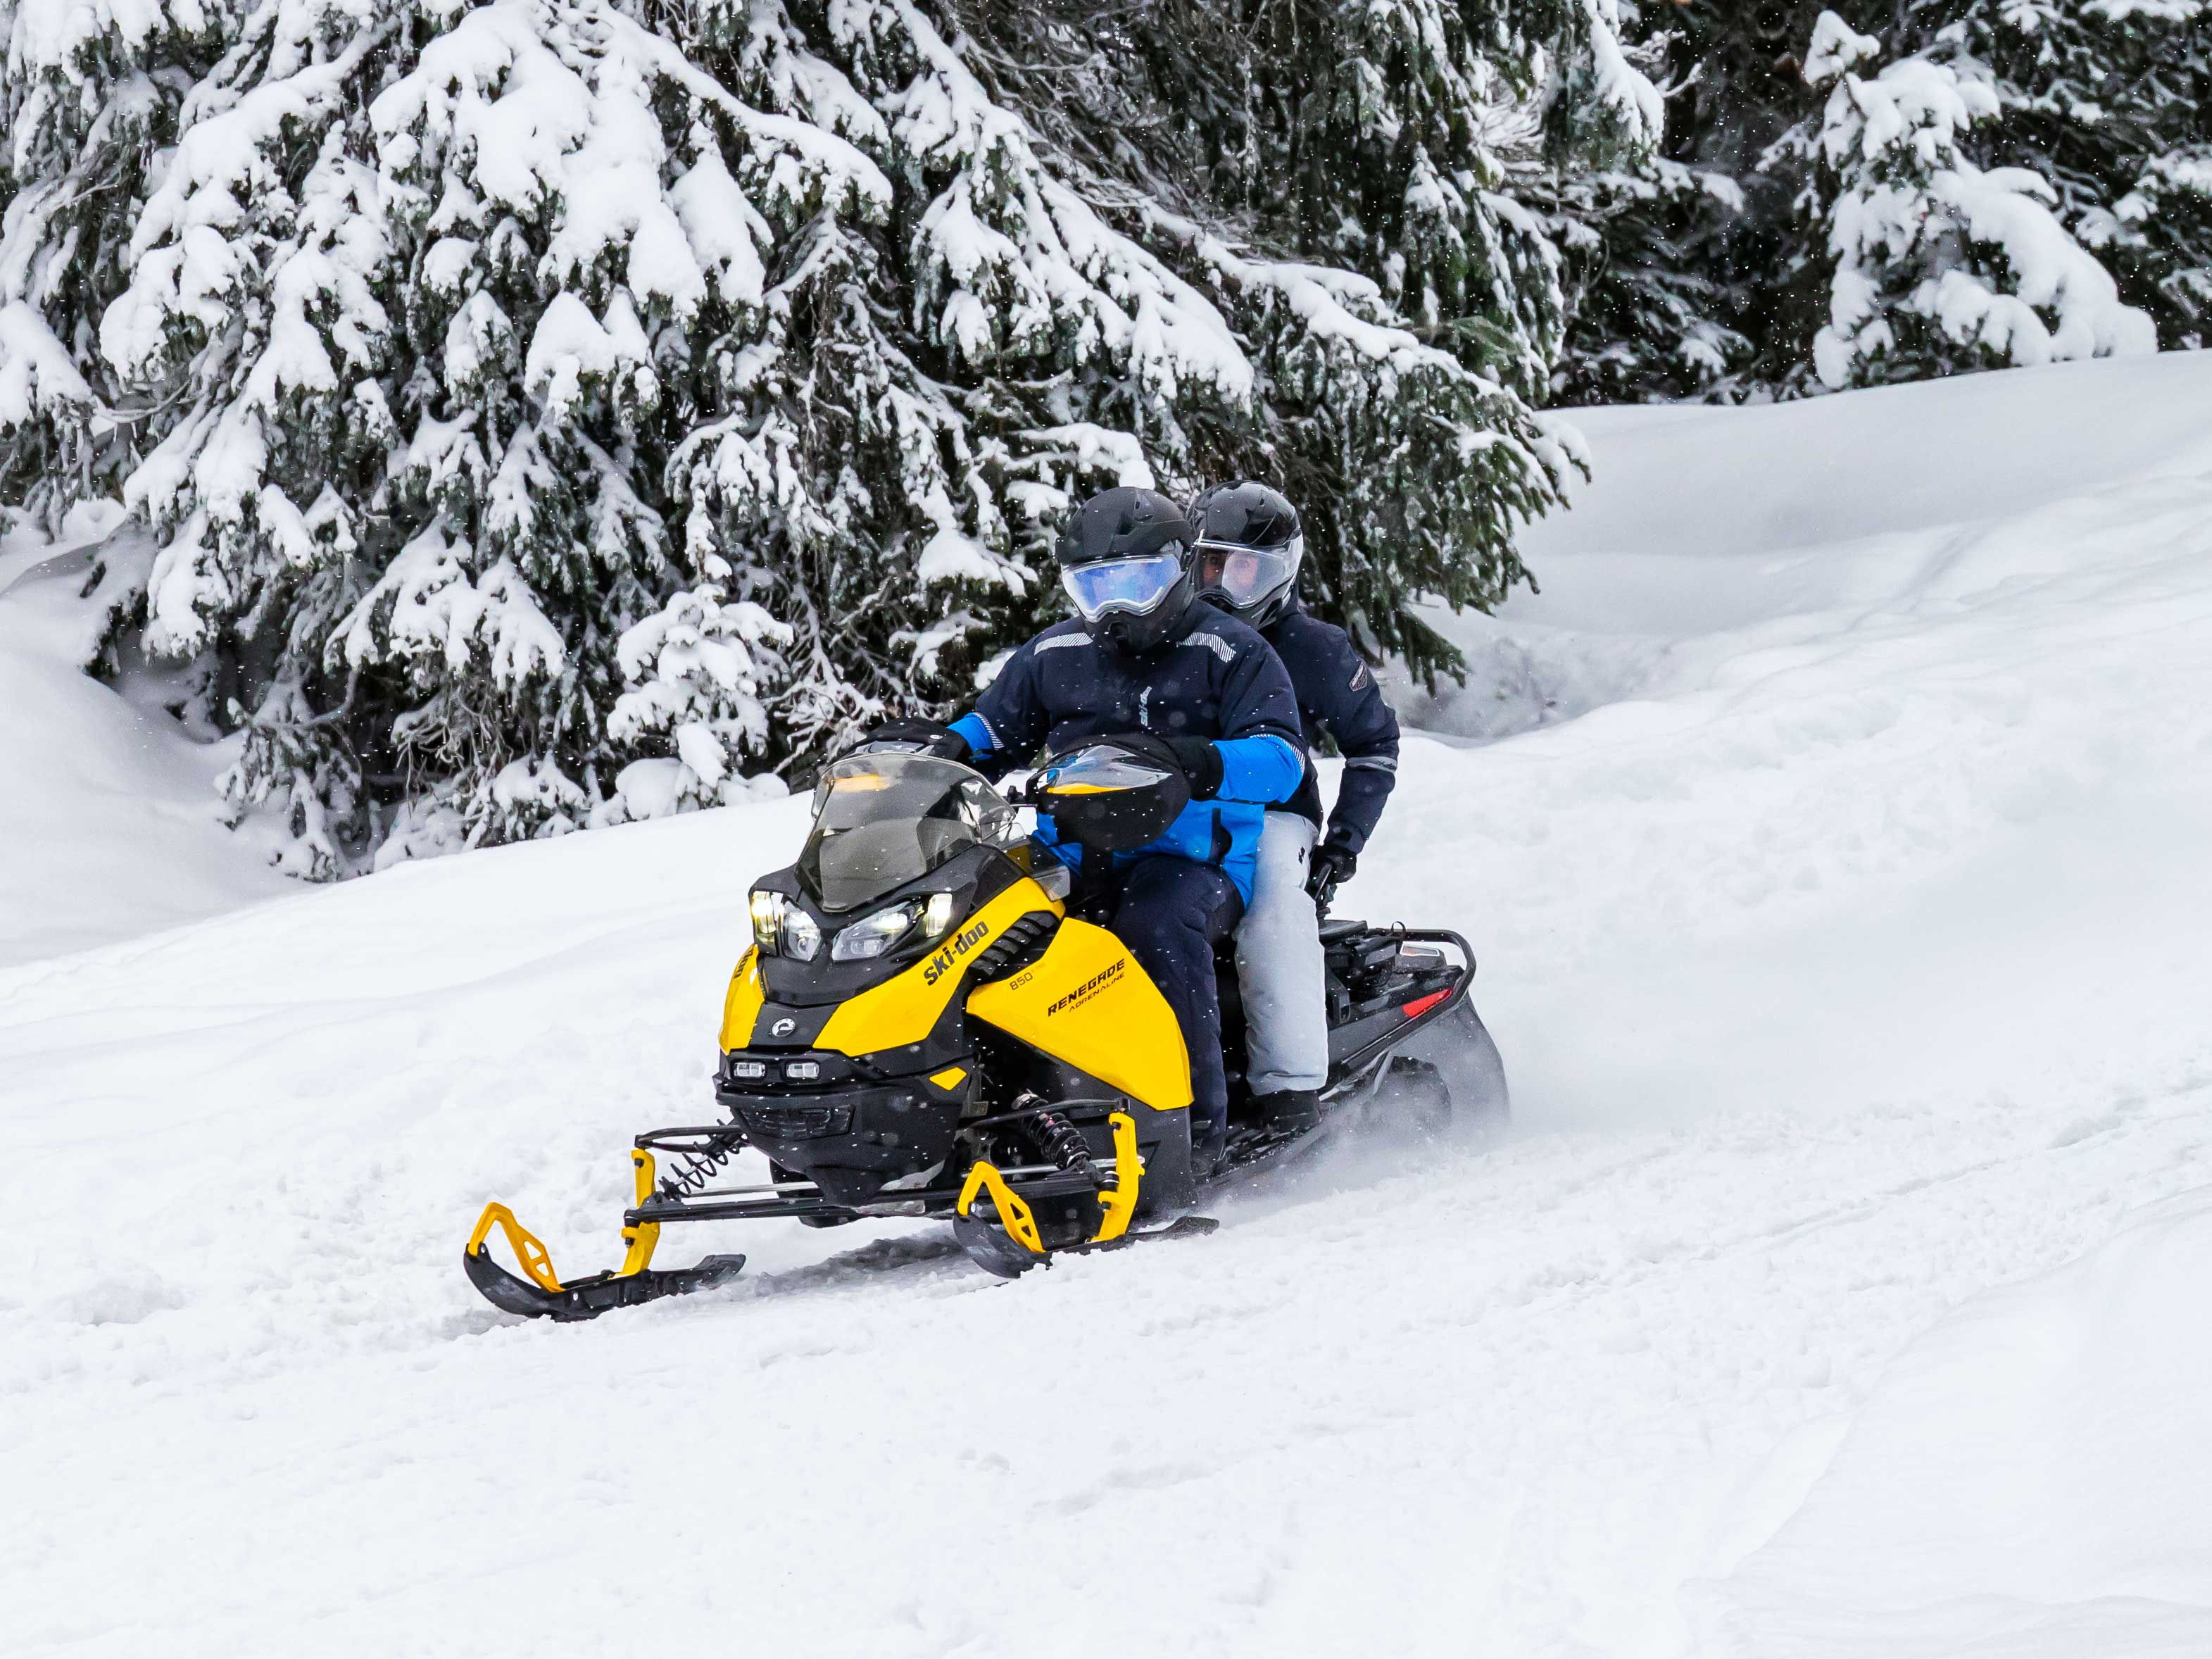 Ski-Doo Snowmobile with passenger on a trail